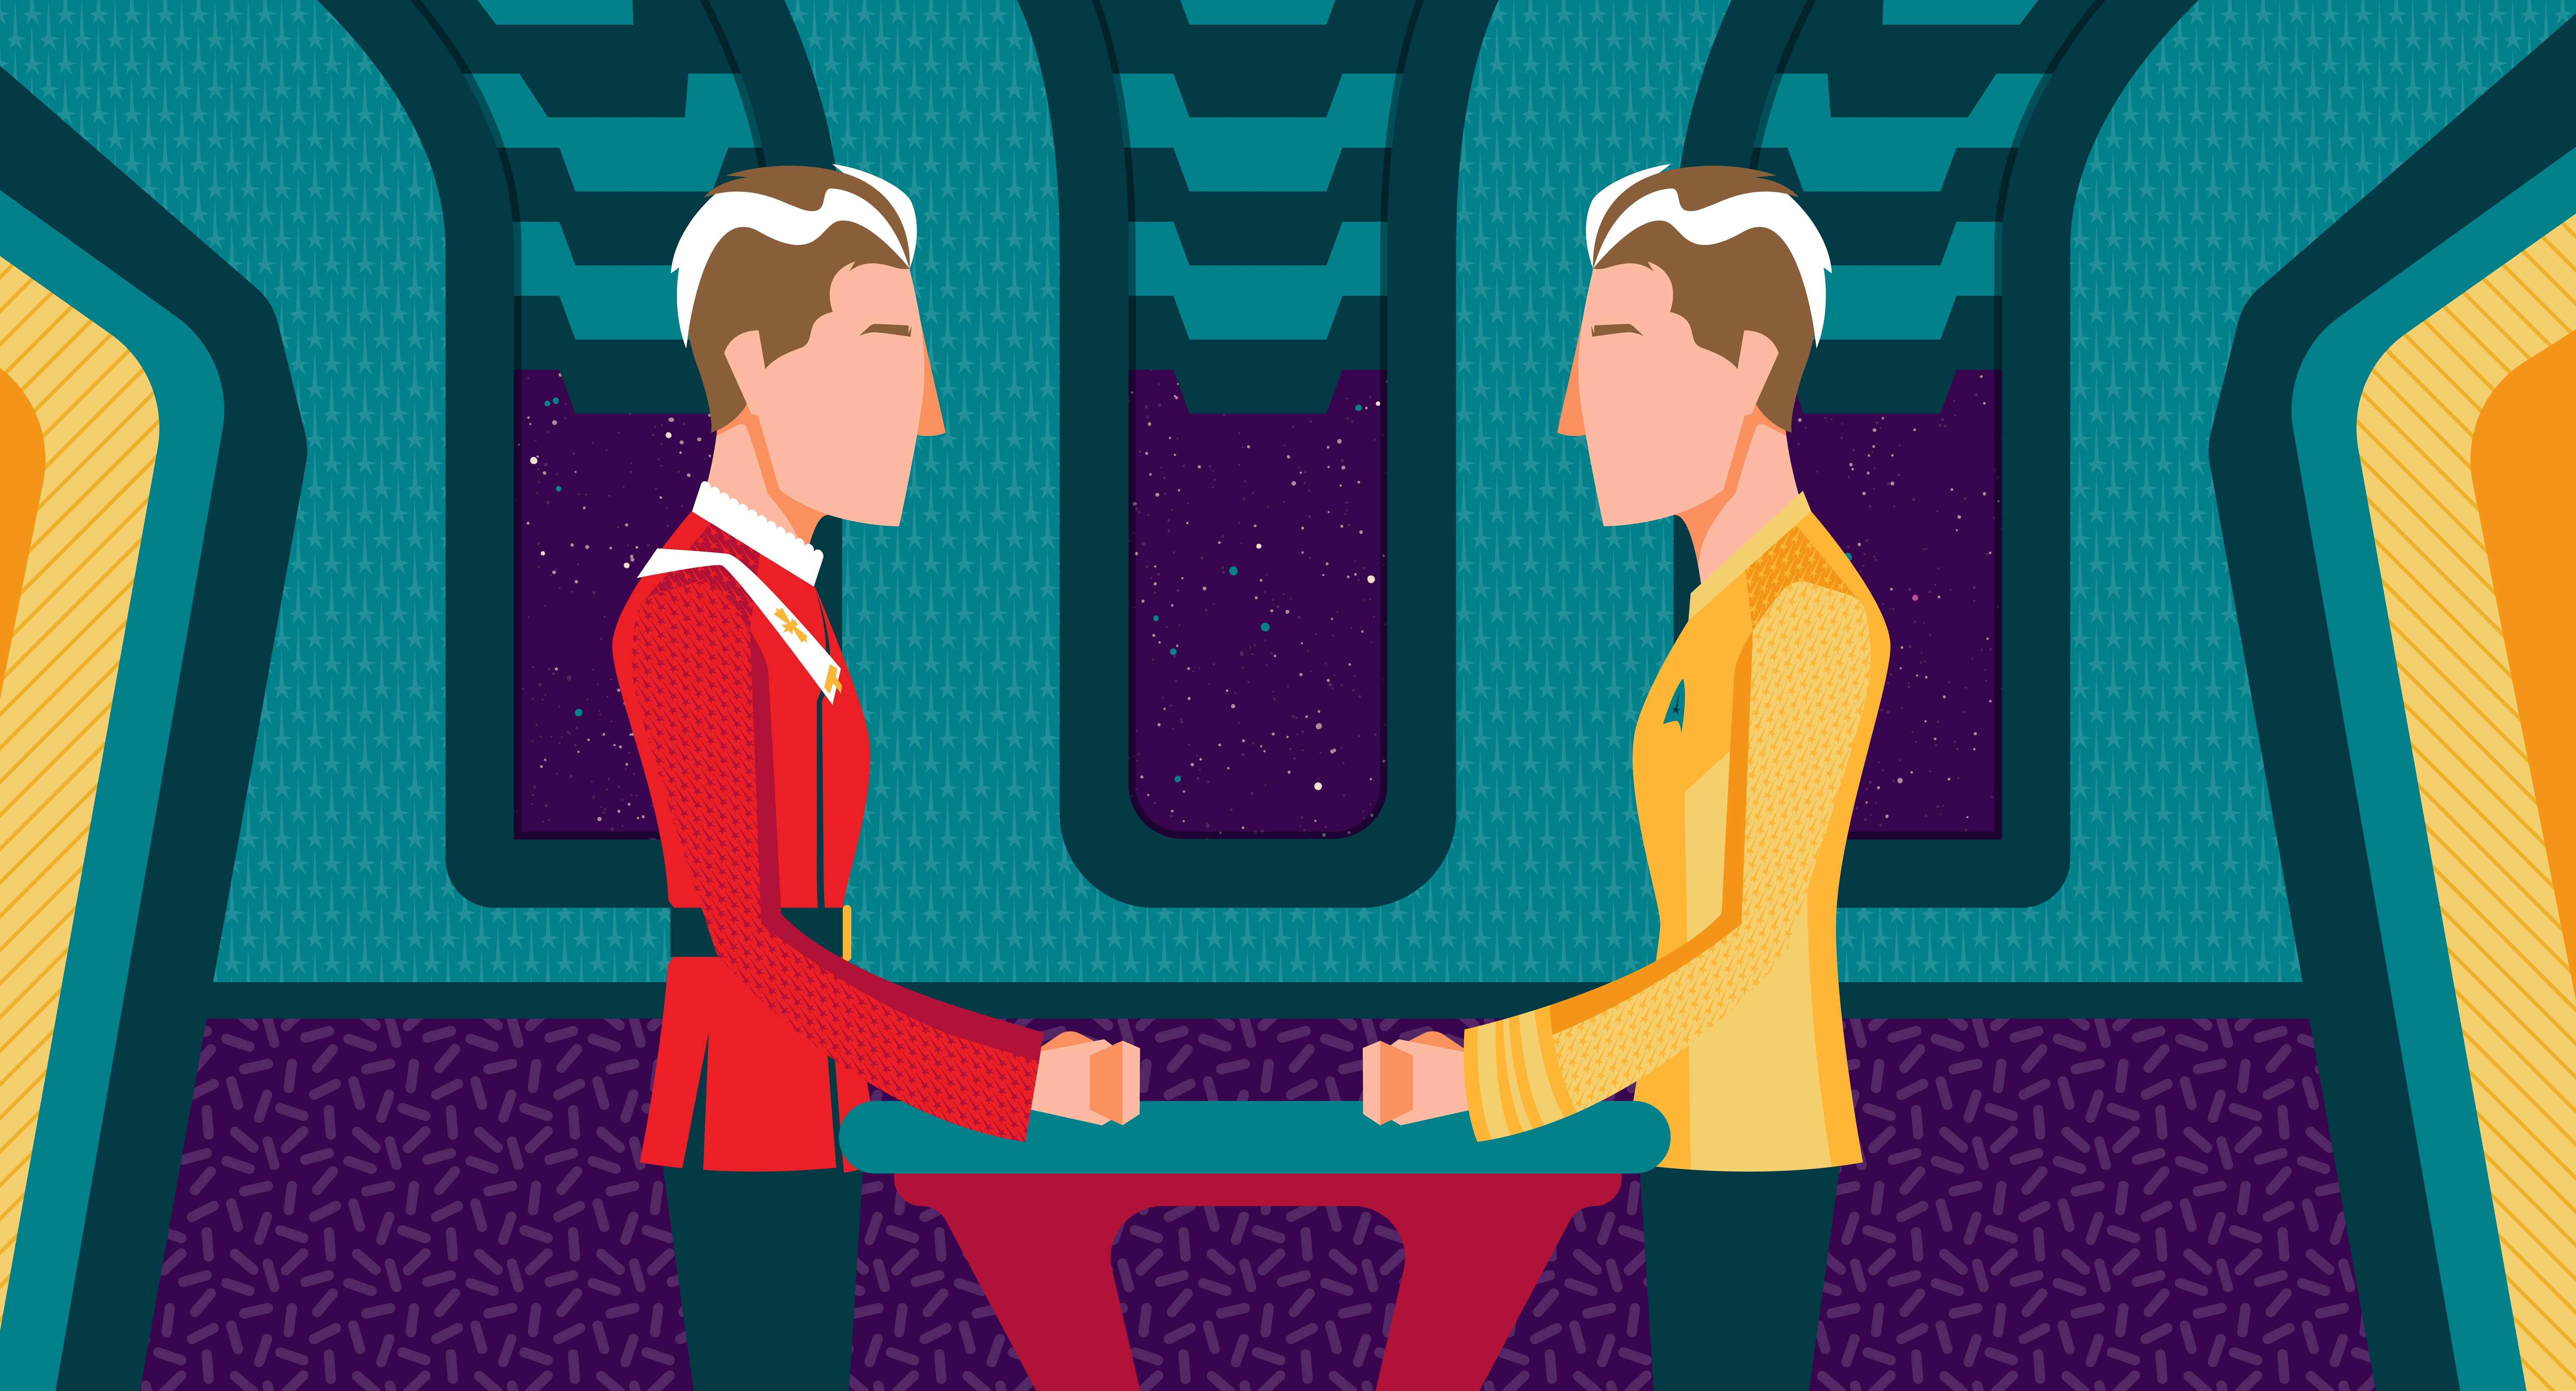 Star Trek Strange New Worlds recap illustrated art with Admiral Pike and Captain Pike